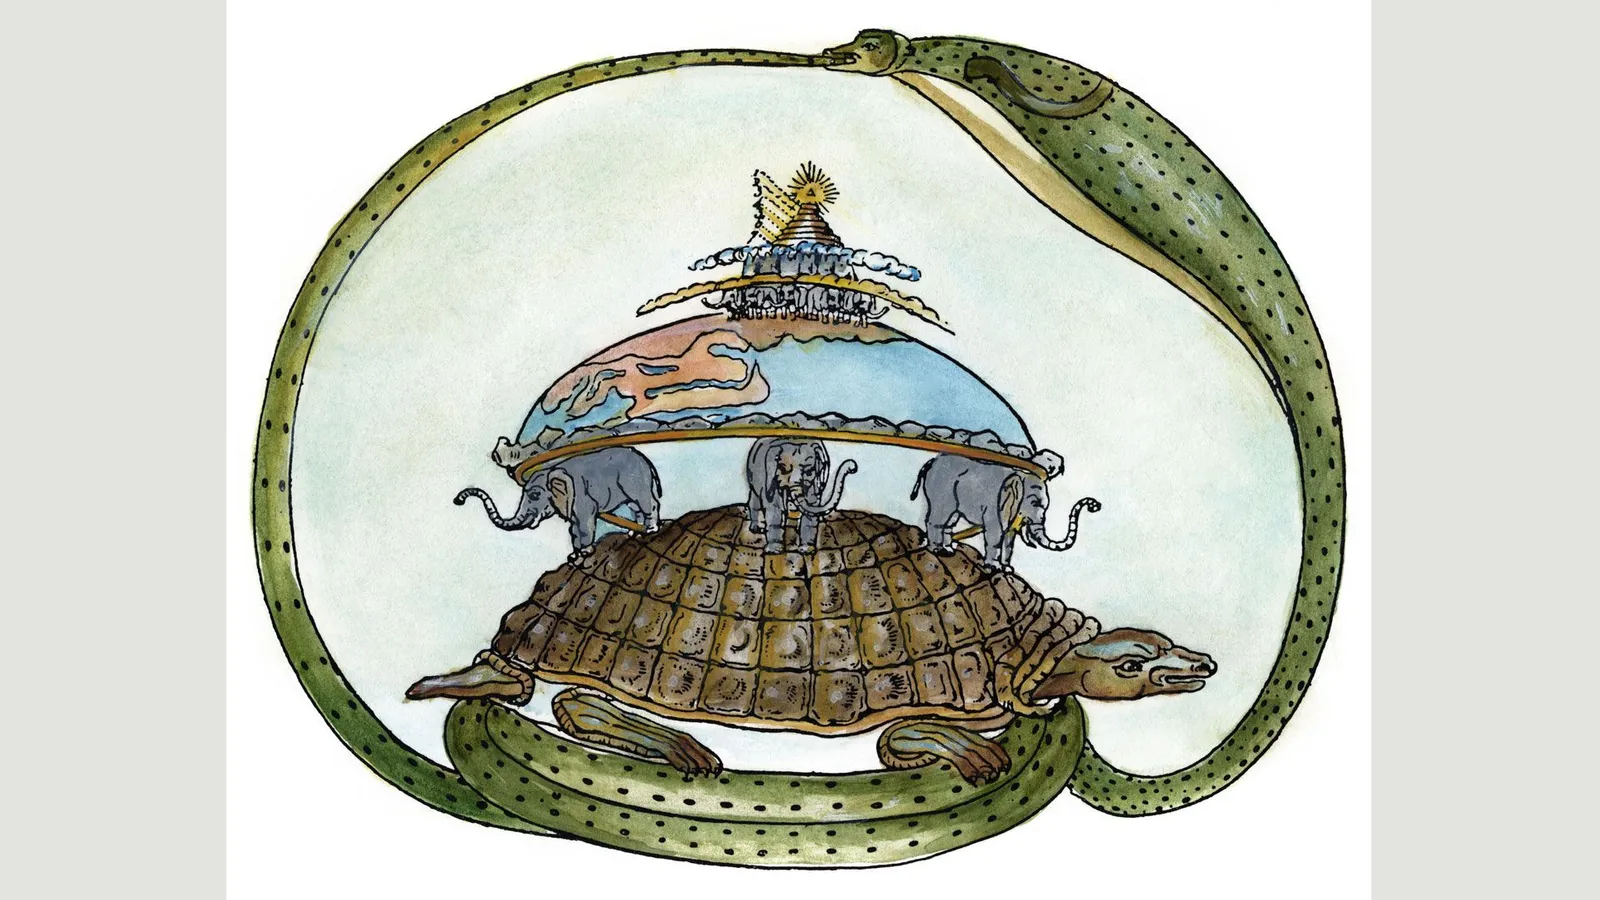 Hindu illustration showing ouroboros, a snake eating its own tail, with the dome of the world inside atop elephants and a giant turtle.